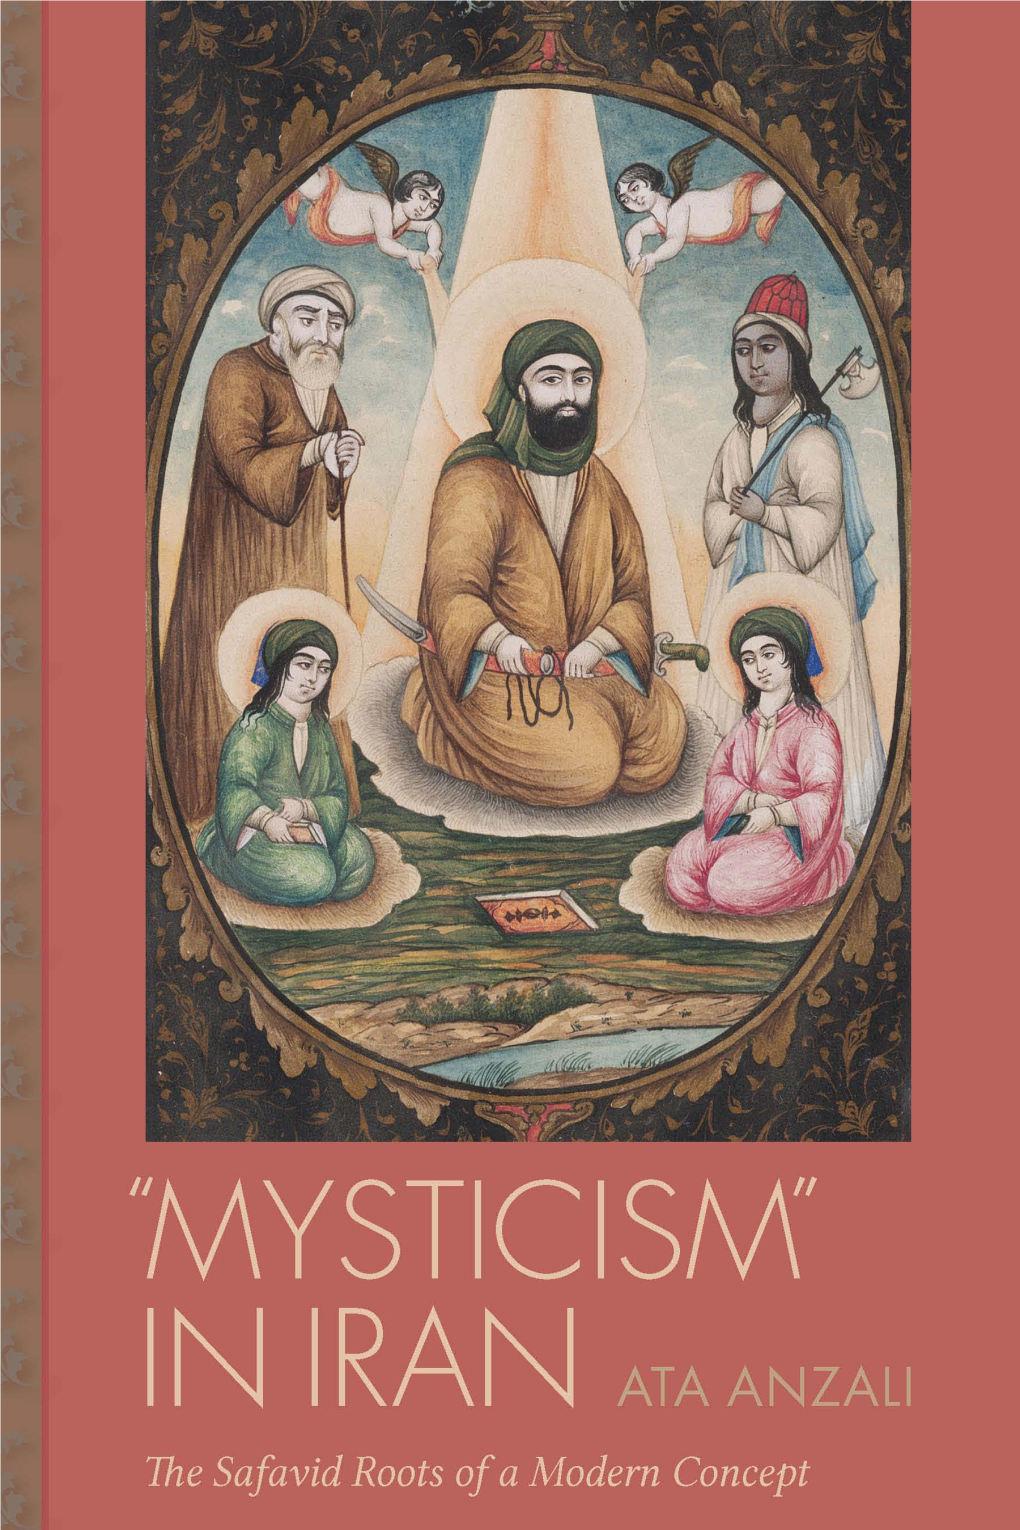 "Mysticism" in Iran: the Safavid Roots of a Modern Concept